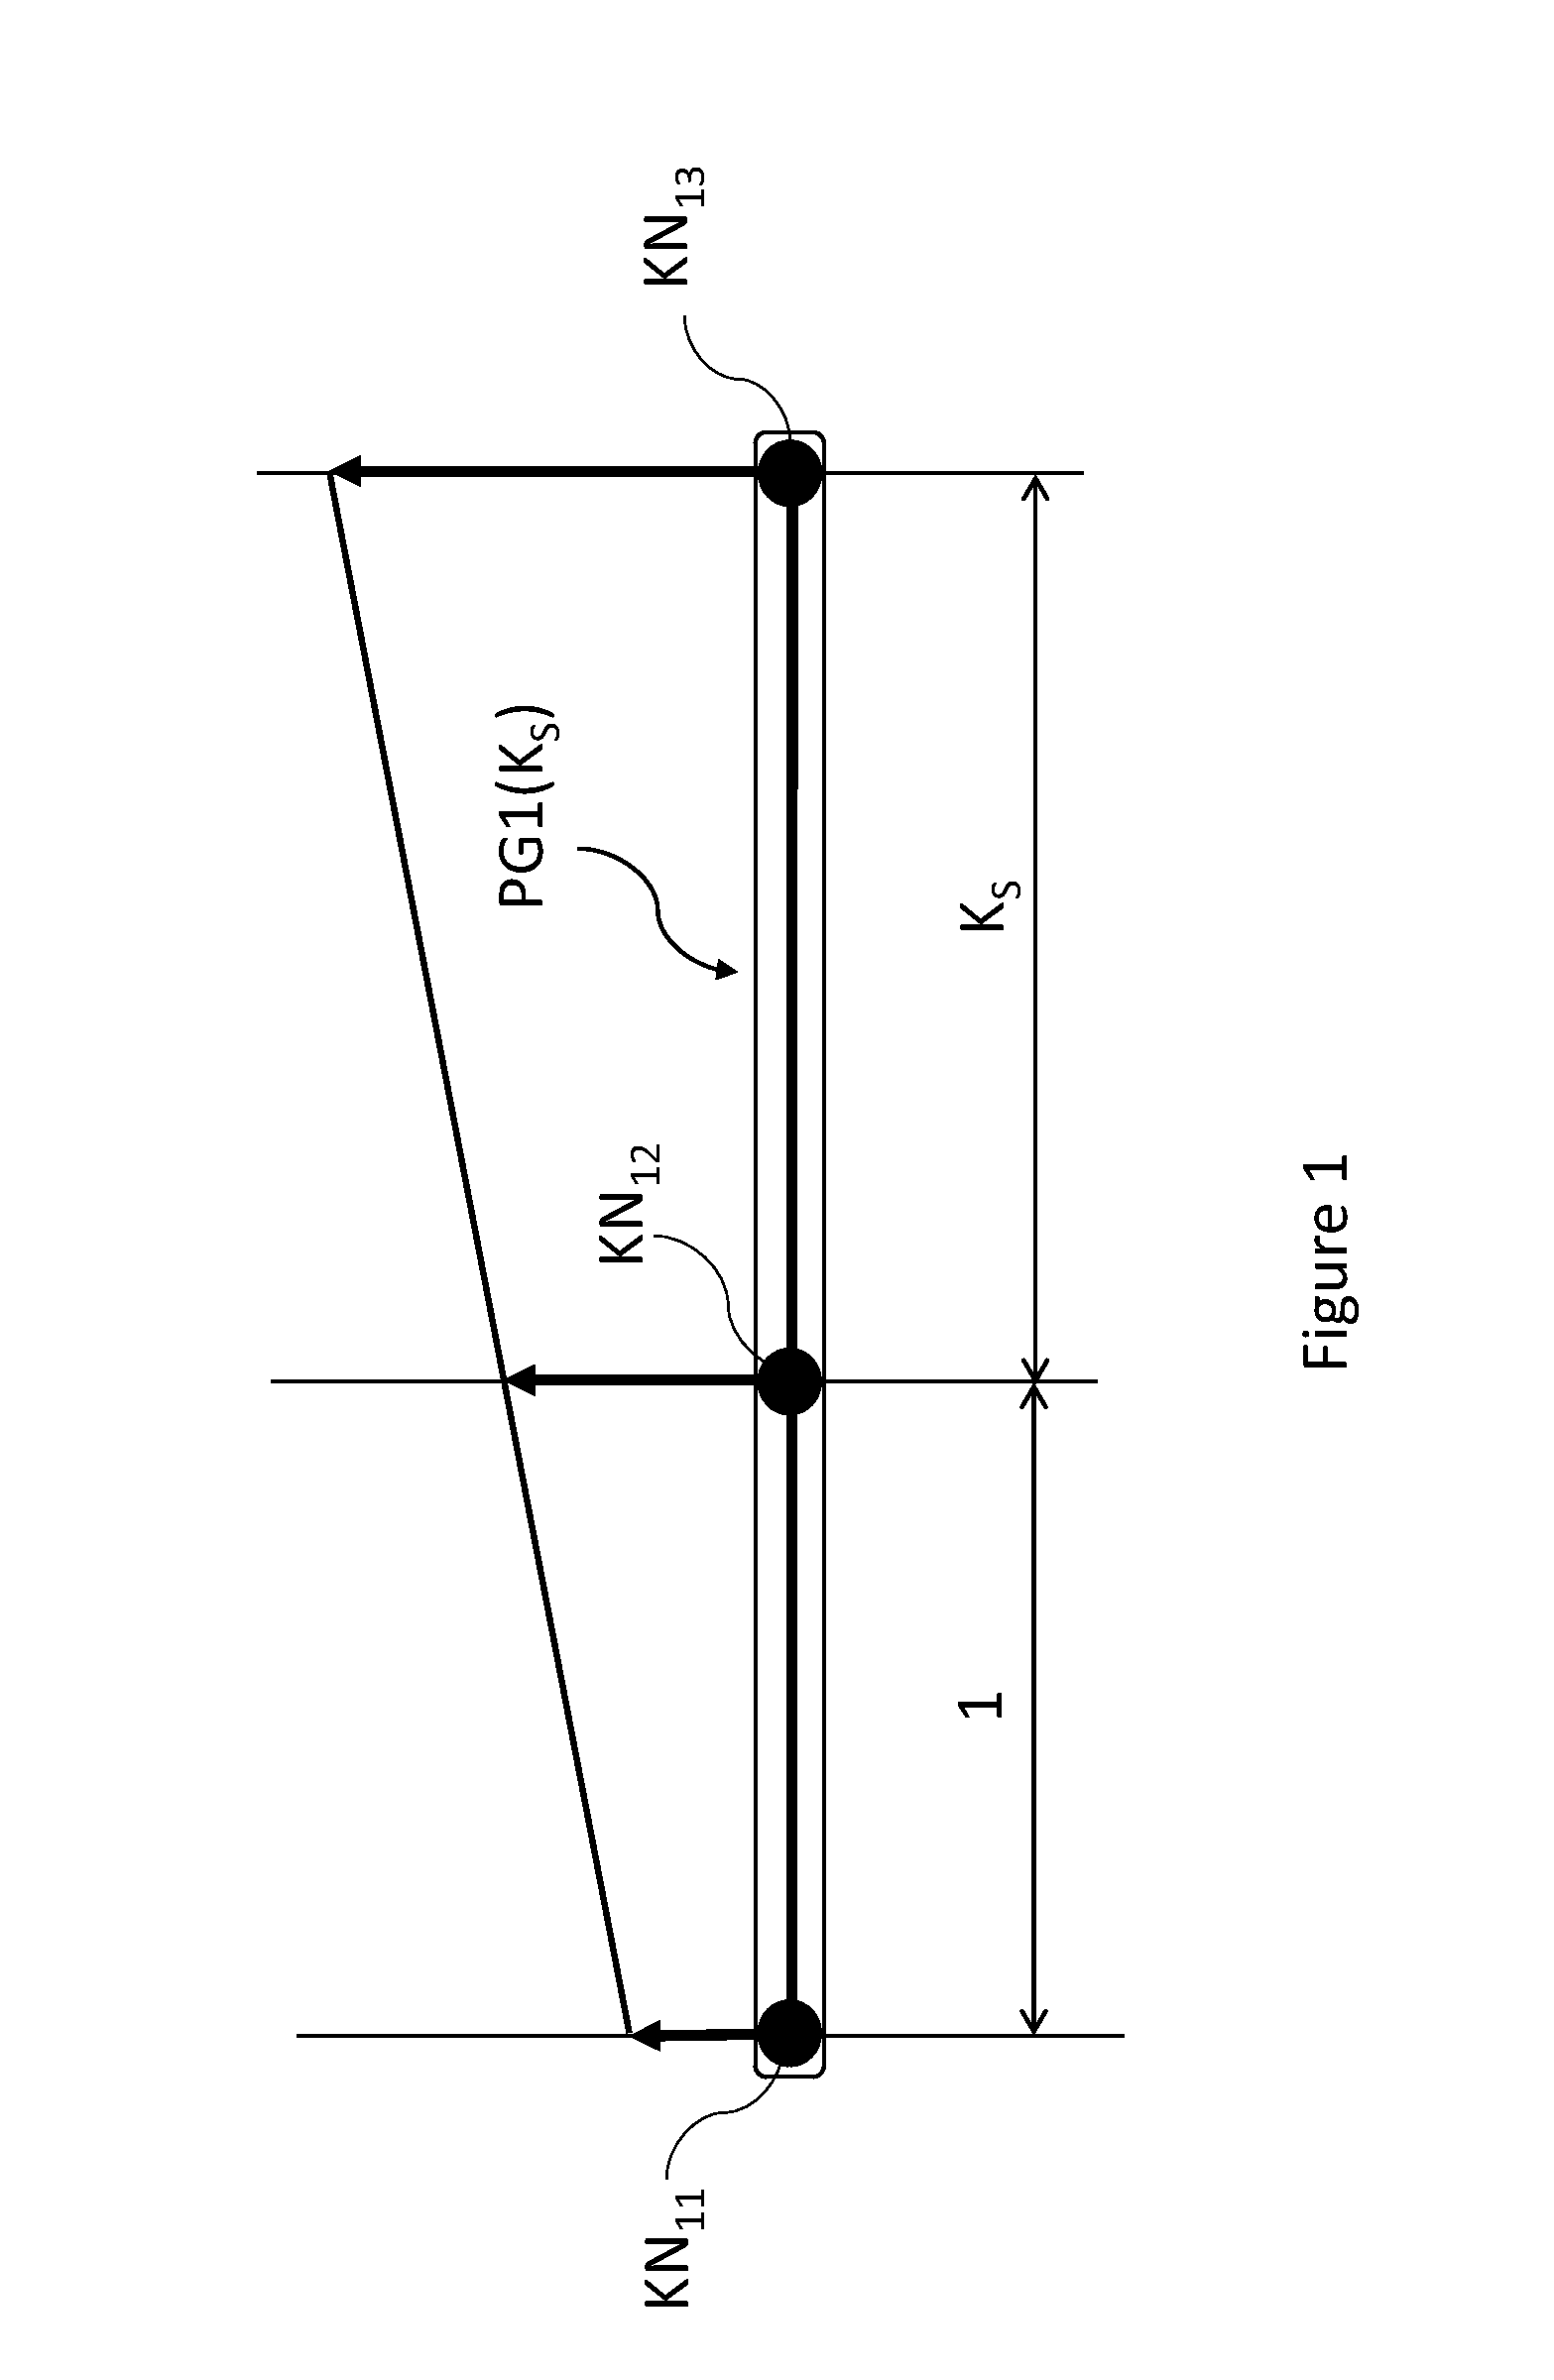 Multimode electromechanical variable speed transmission apparatus and method of control